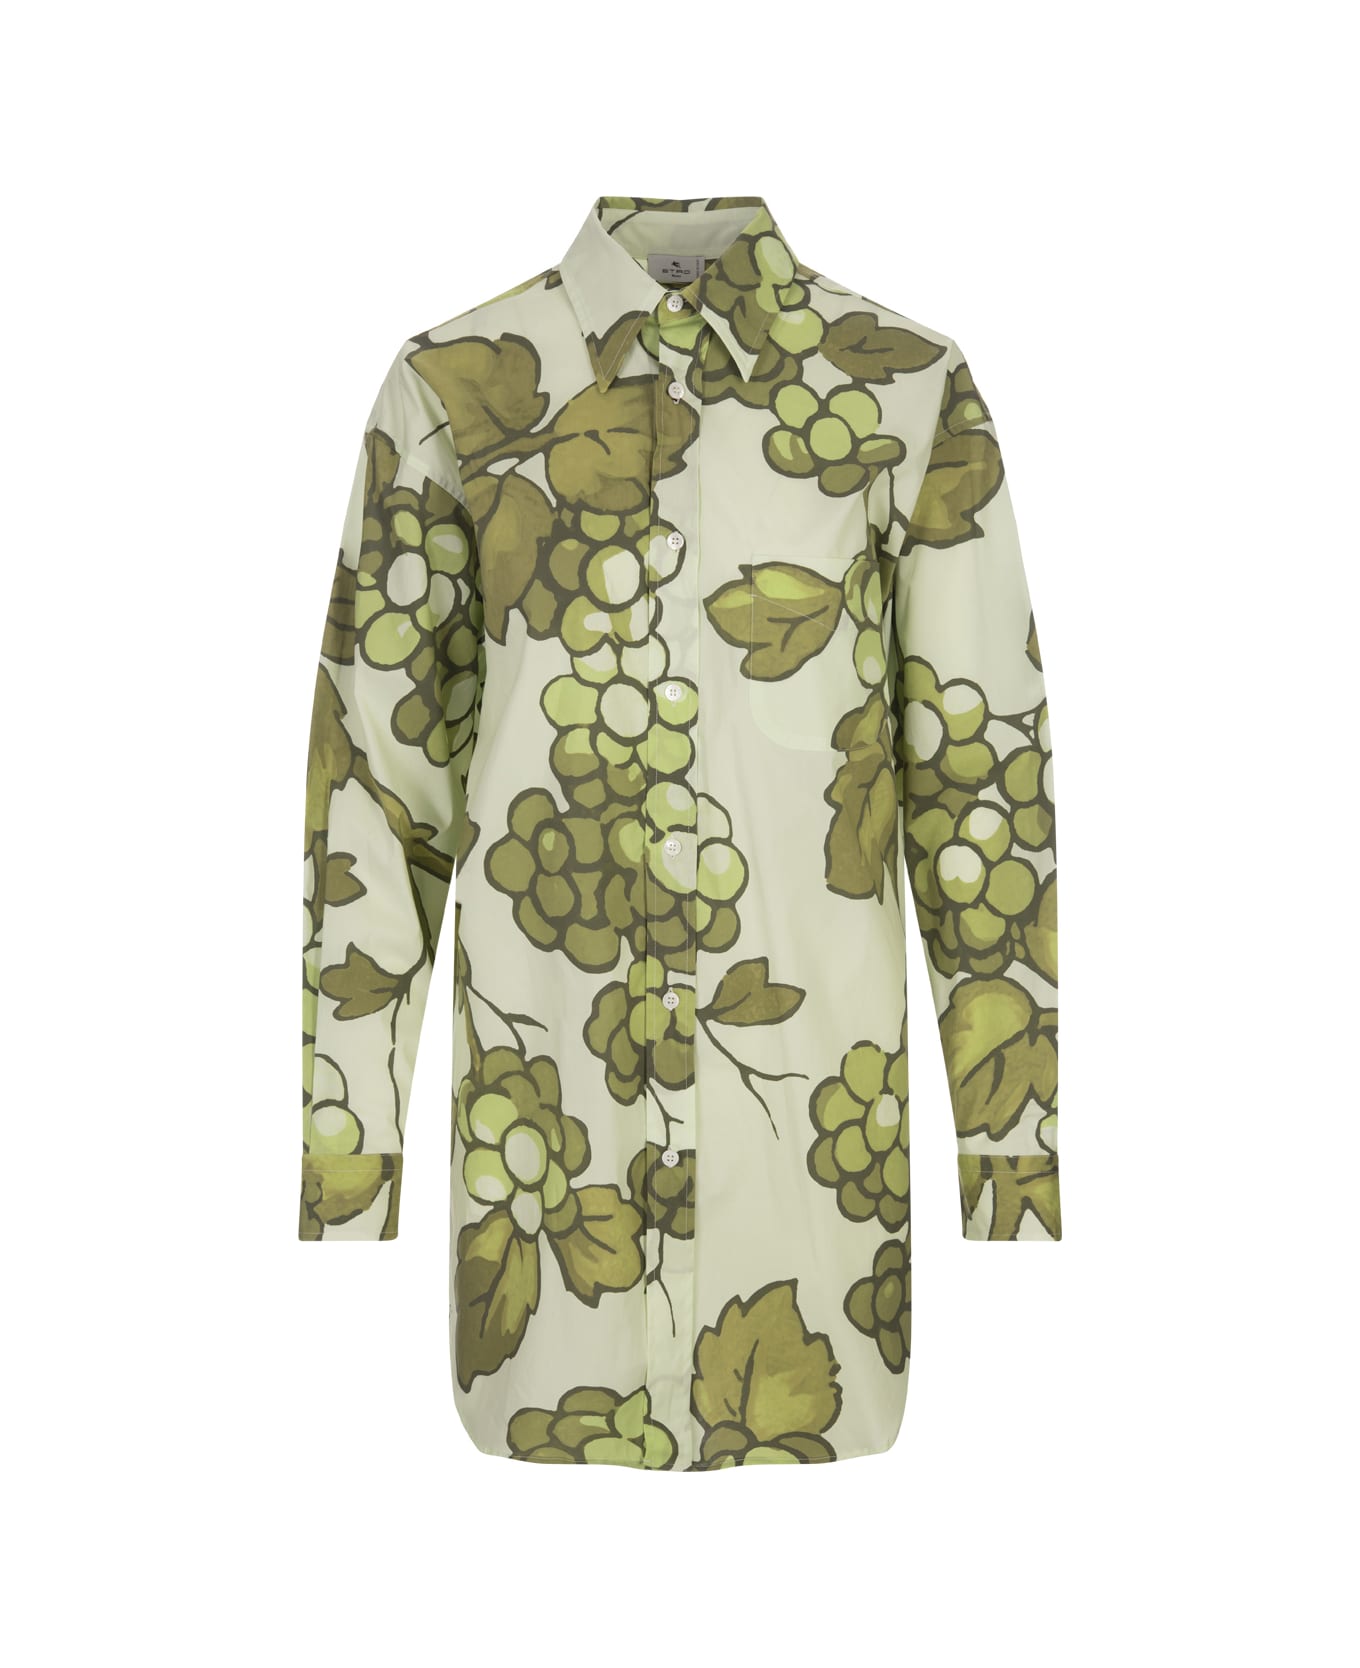 Etro Shirt With Green Barries Print - Verde シャツ